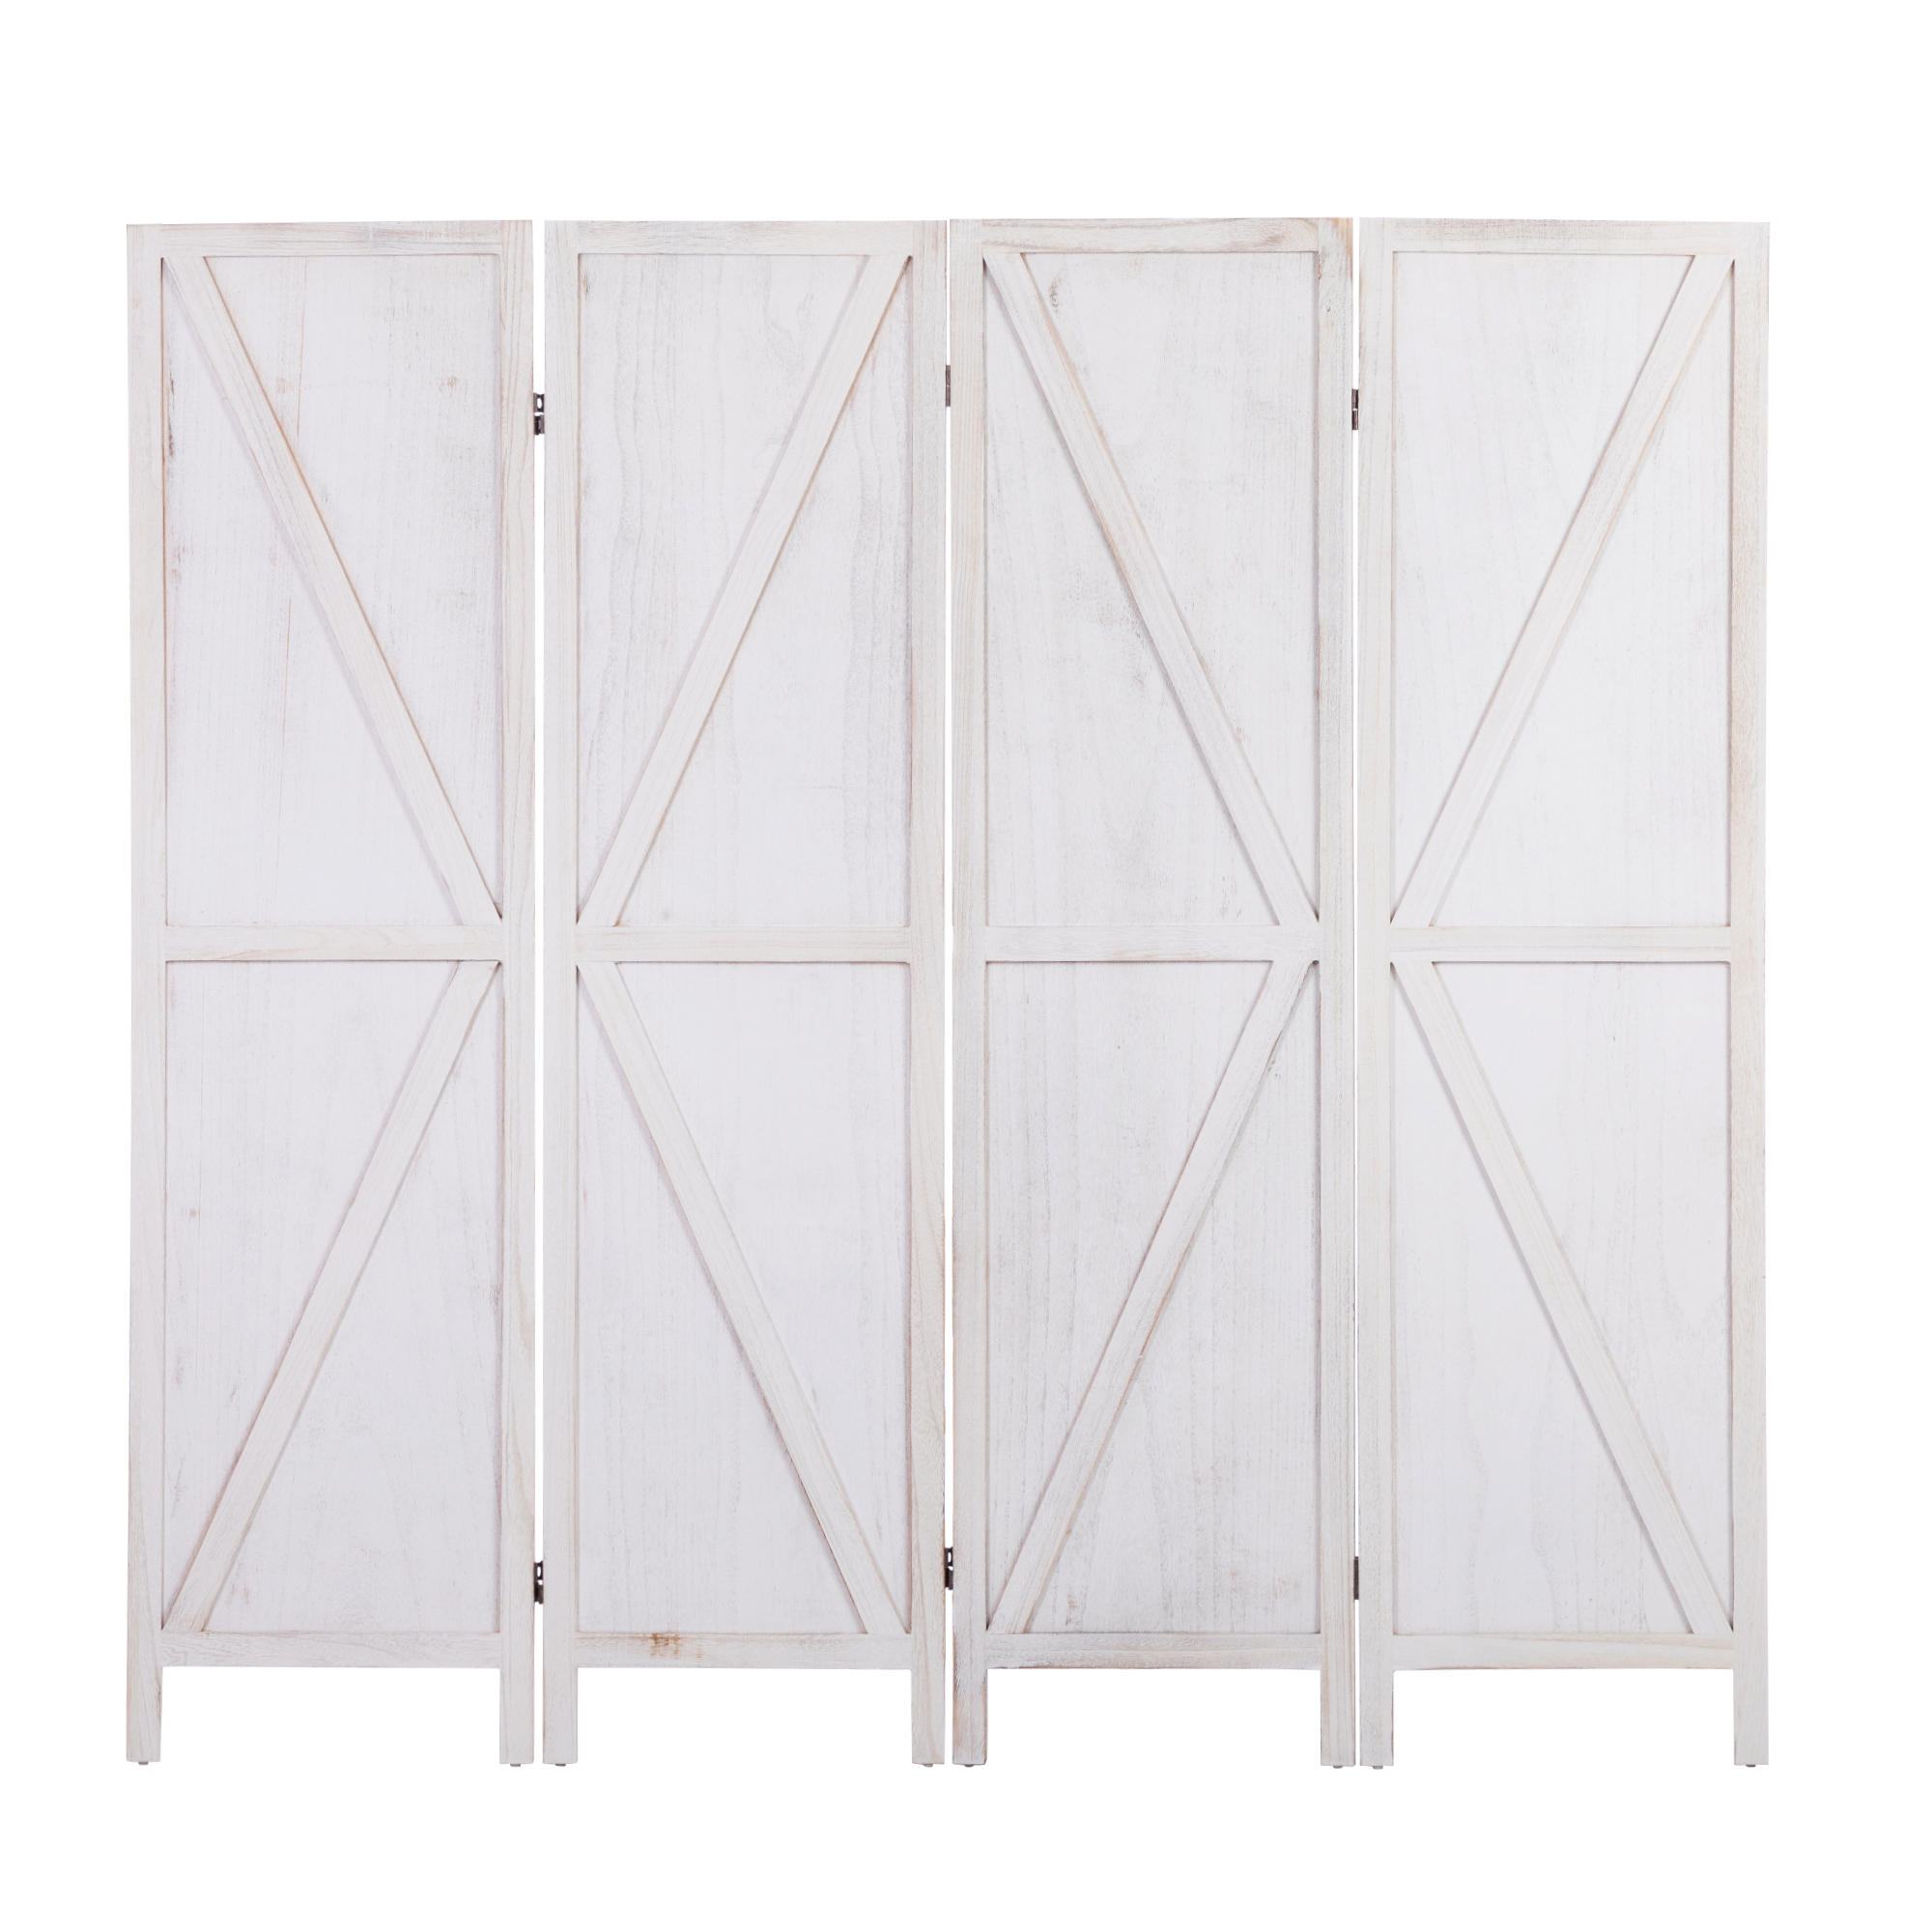 UWR-Nite Room dividers and Folding Privacy Screens, Privacy Screen, Partition Wall dividers for Rooms, Room Separator, Temporary Wall, Folding Screen - image 1 of 7